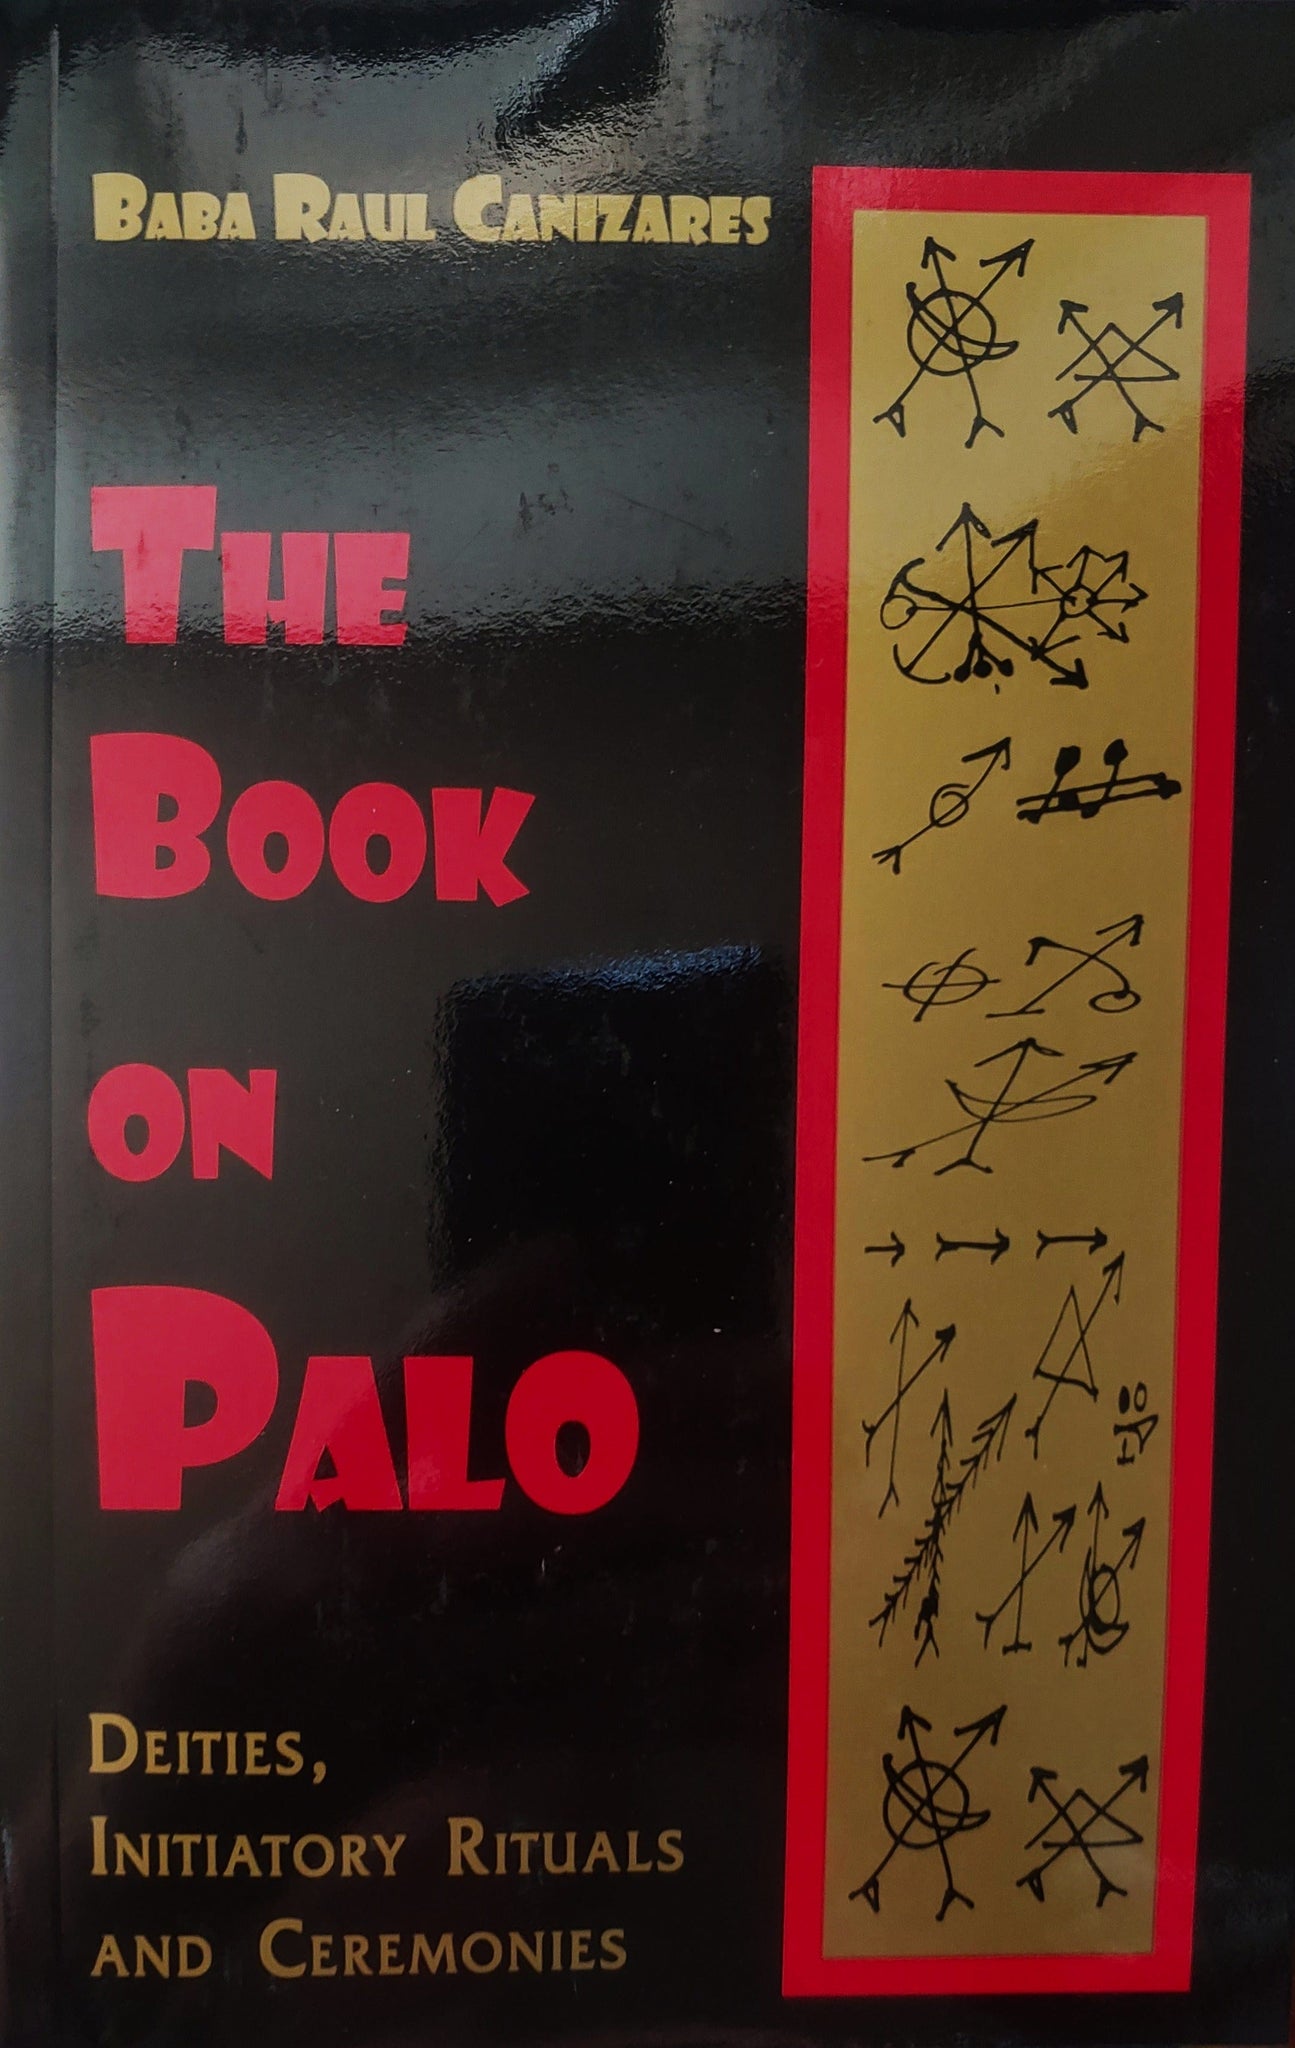 The Book on Palo by Baba Raul Canizares